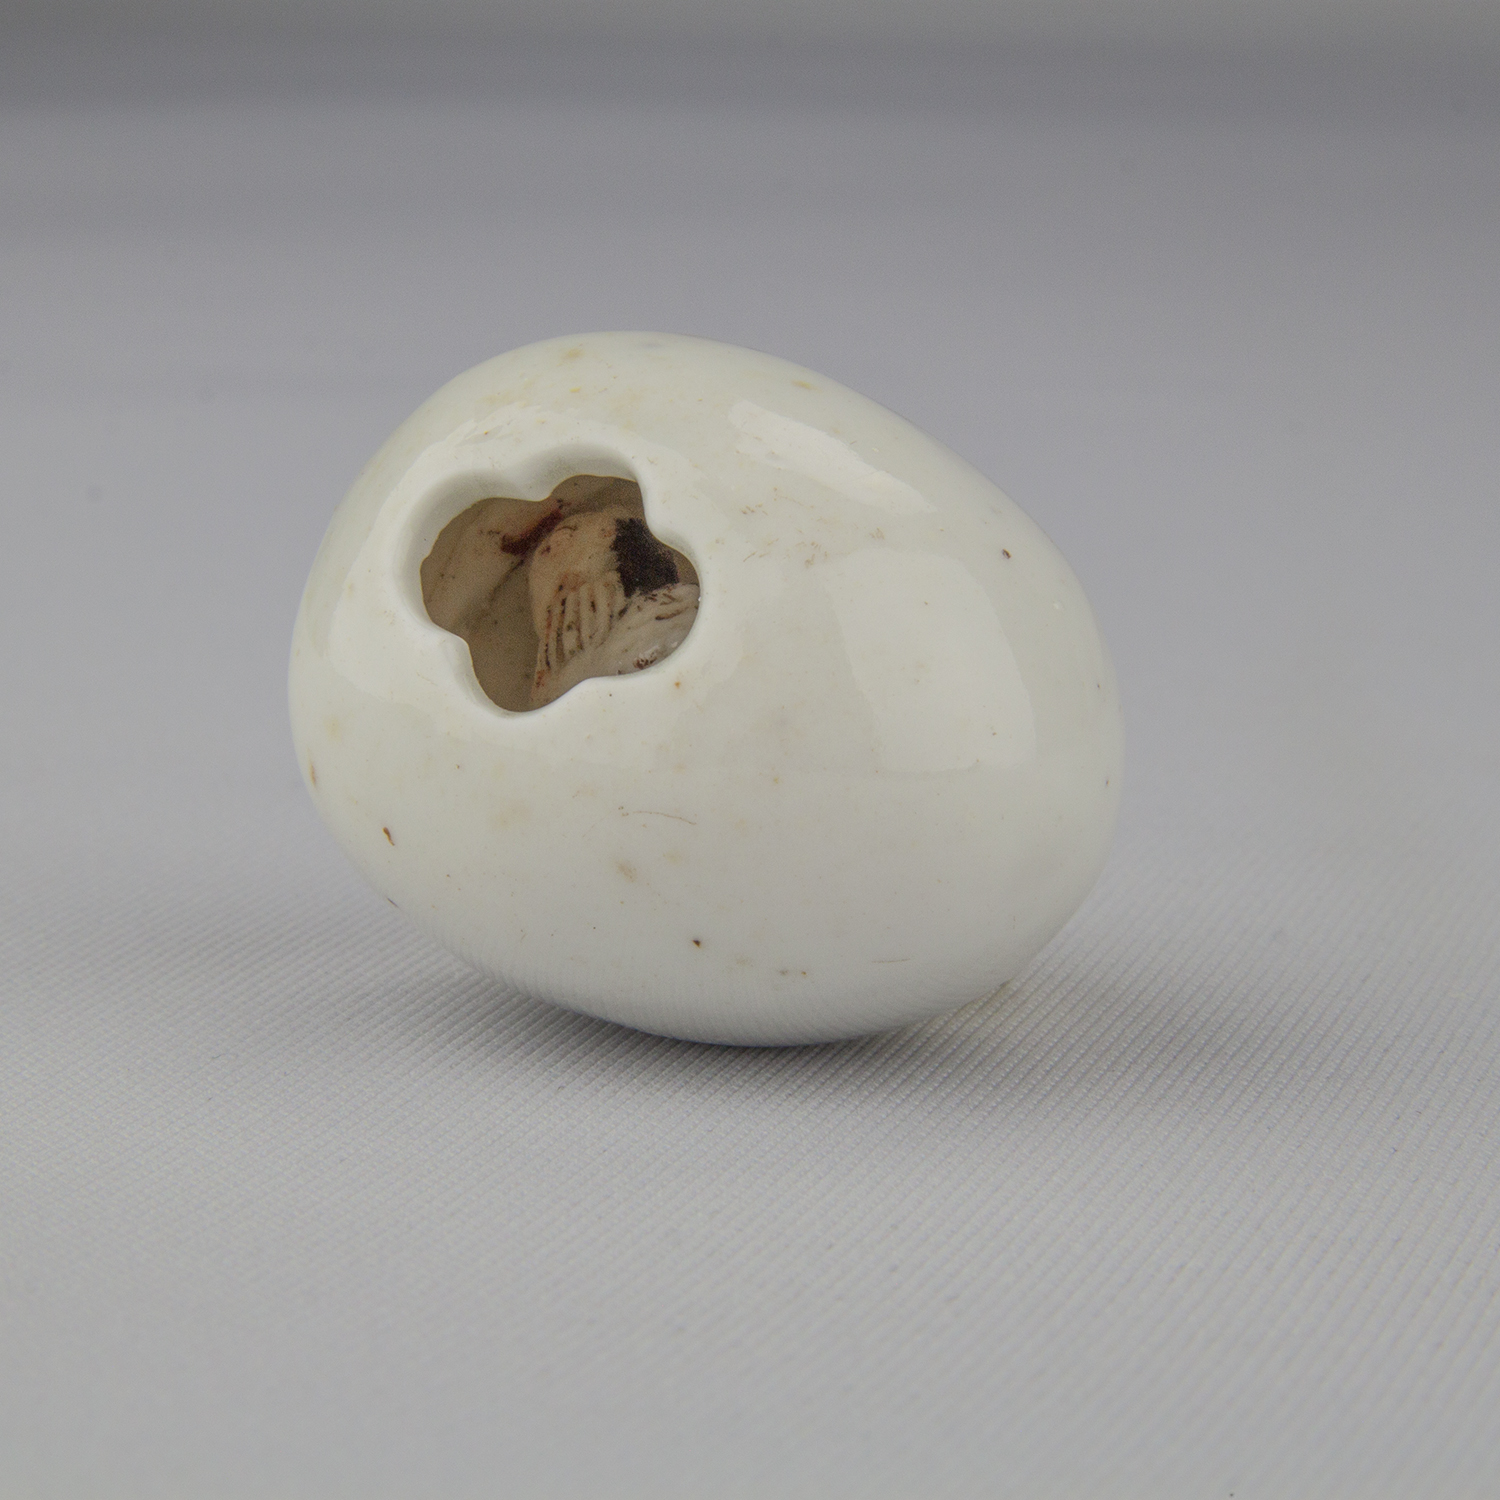 Netsuke depicting a chicken inside of an egg, ca. 18th–19th century, glazed porcelain, The Herman D. Doochin Collection, 1992.160